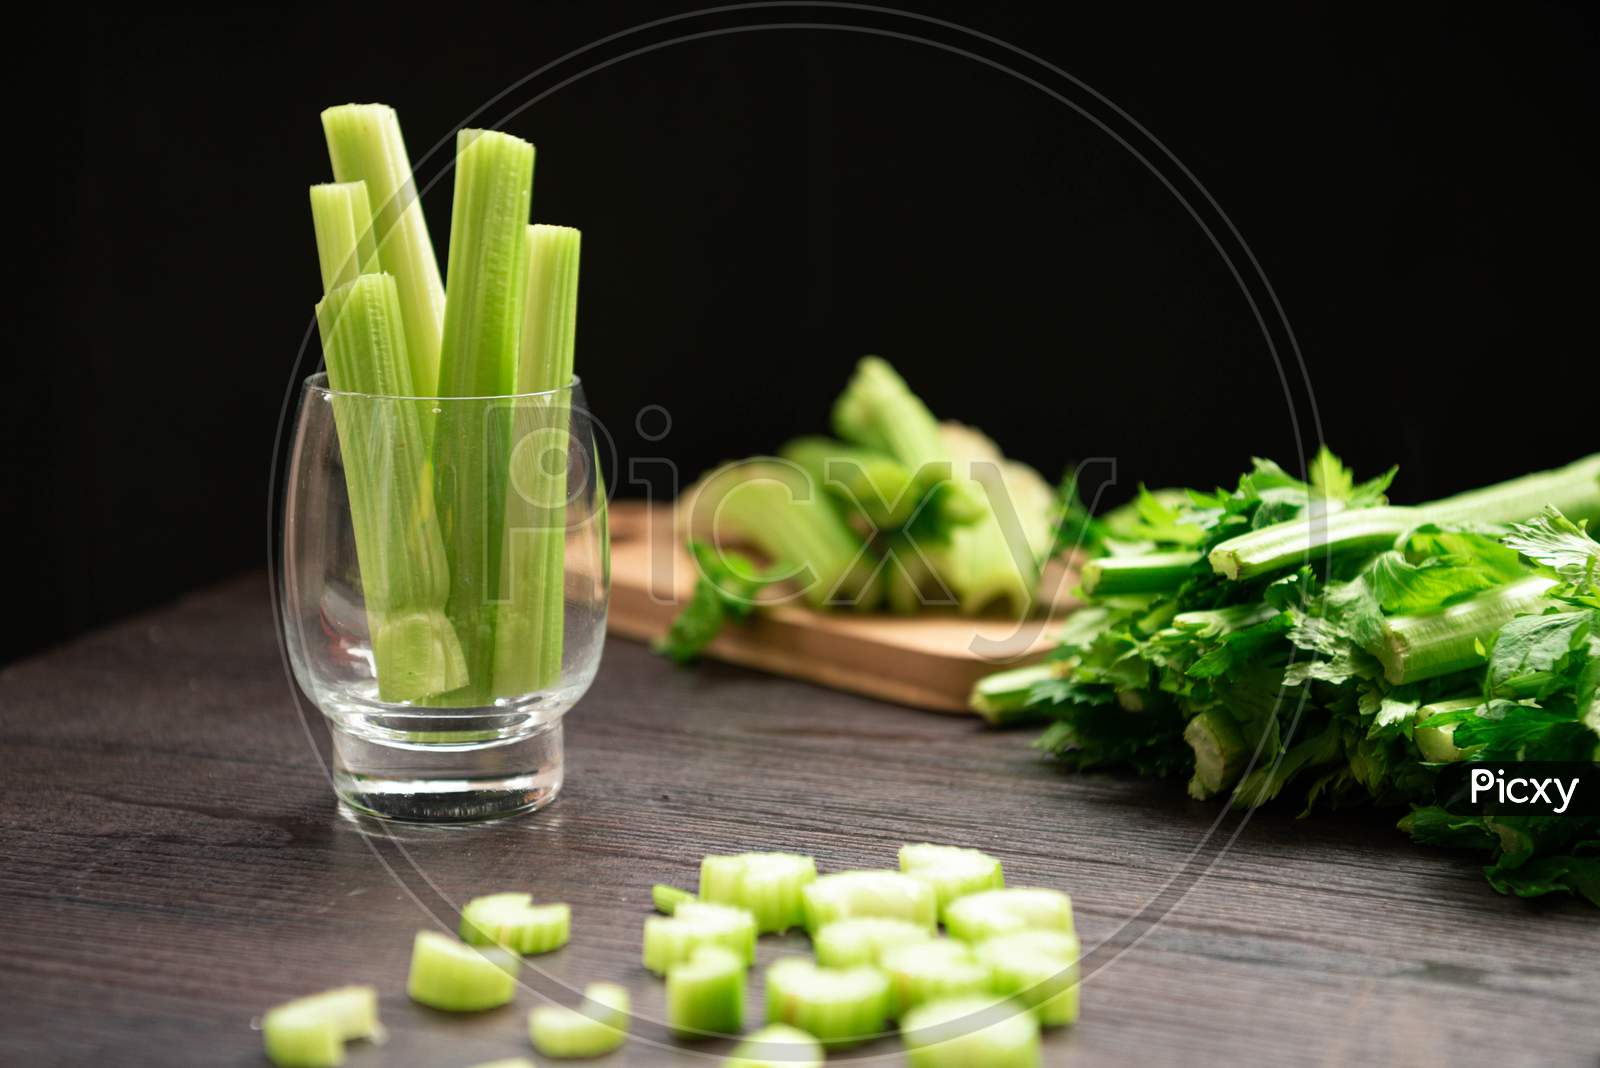 Bunch Of Fresh Celery Stalk On Wooden Table With Leaves Prepared For Making Juice. Food And Ingredients  Of Healthy Vegetable. Freshness Herbal And Low Calories For Dieting With Plenty Of Vitamin